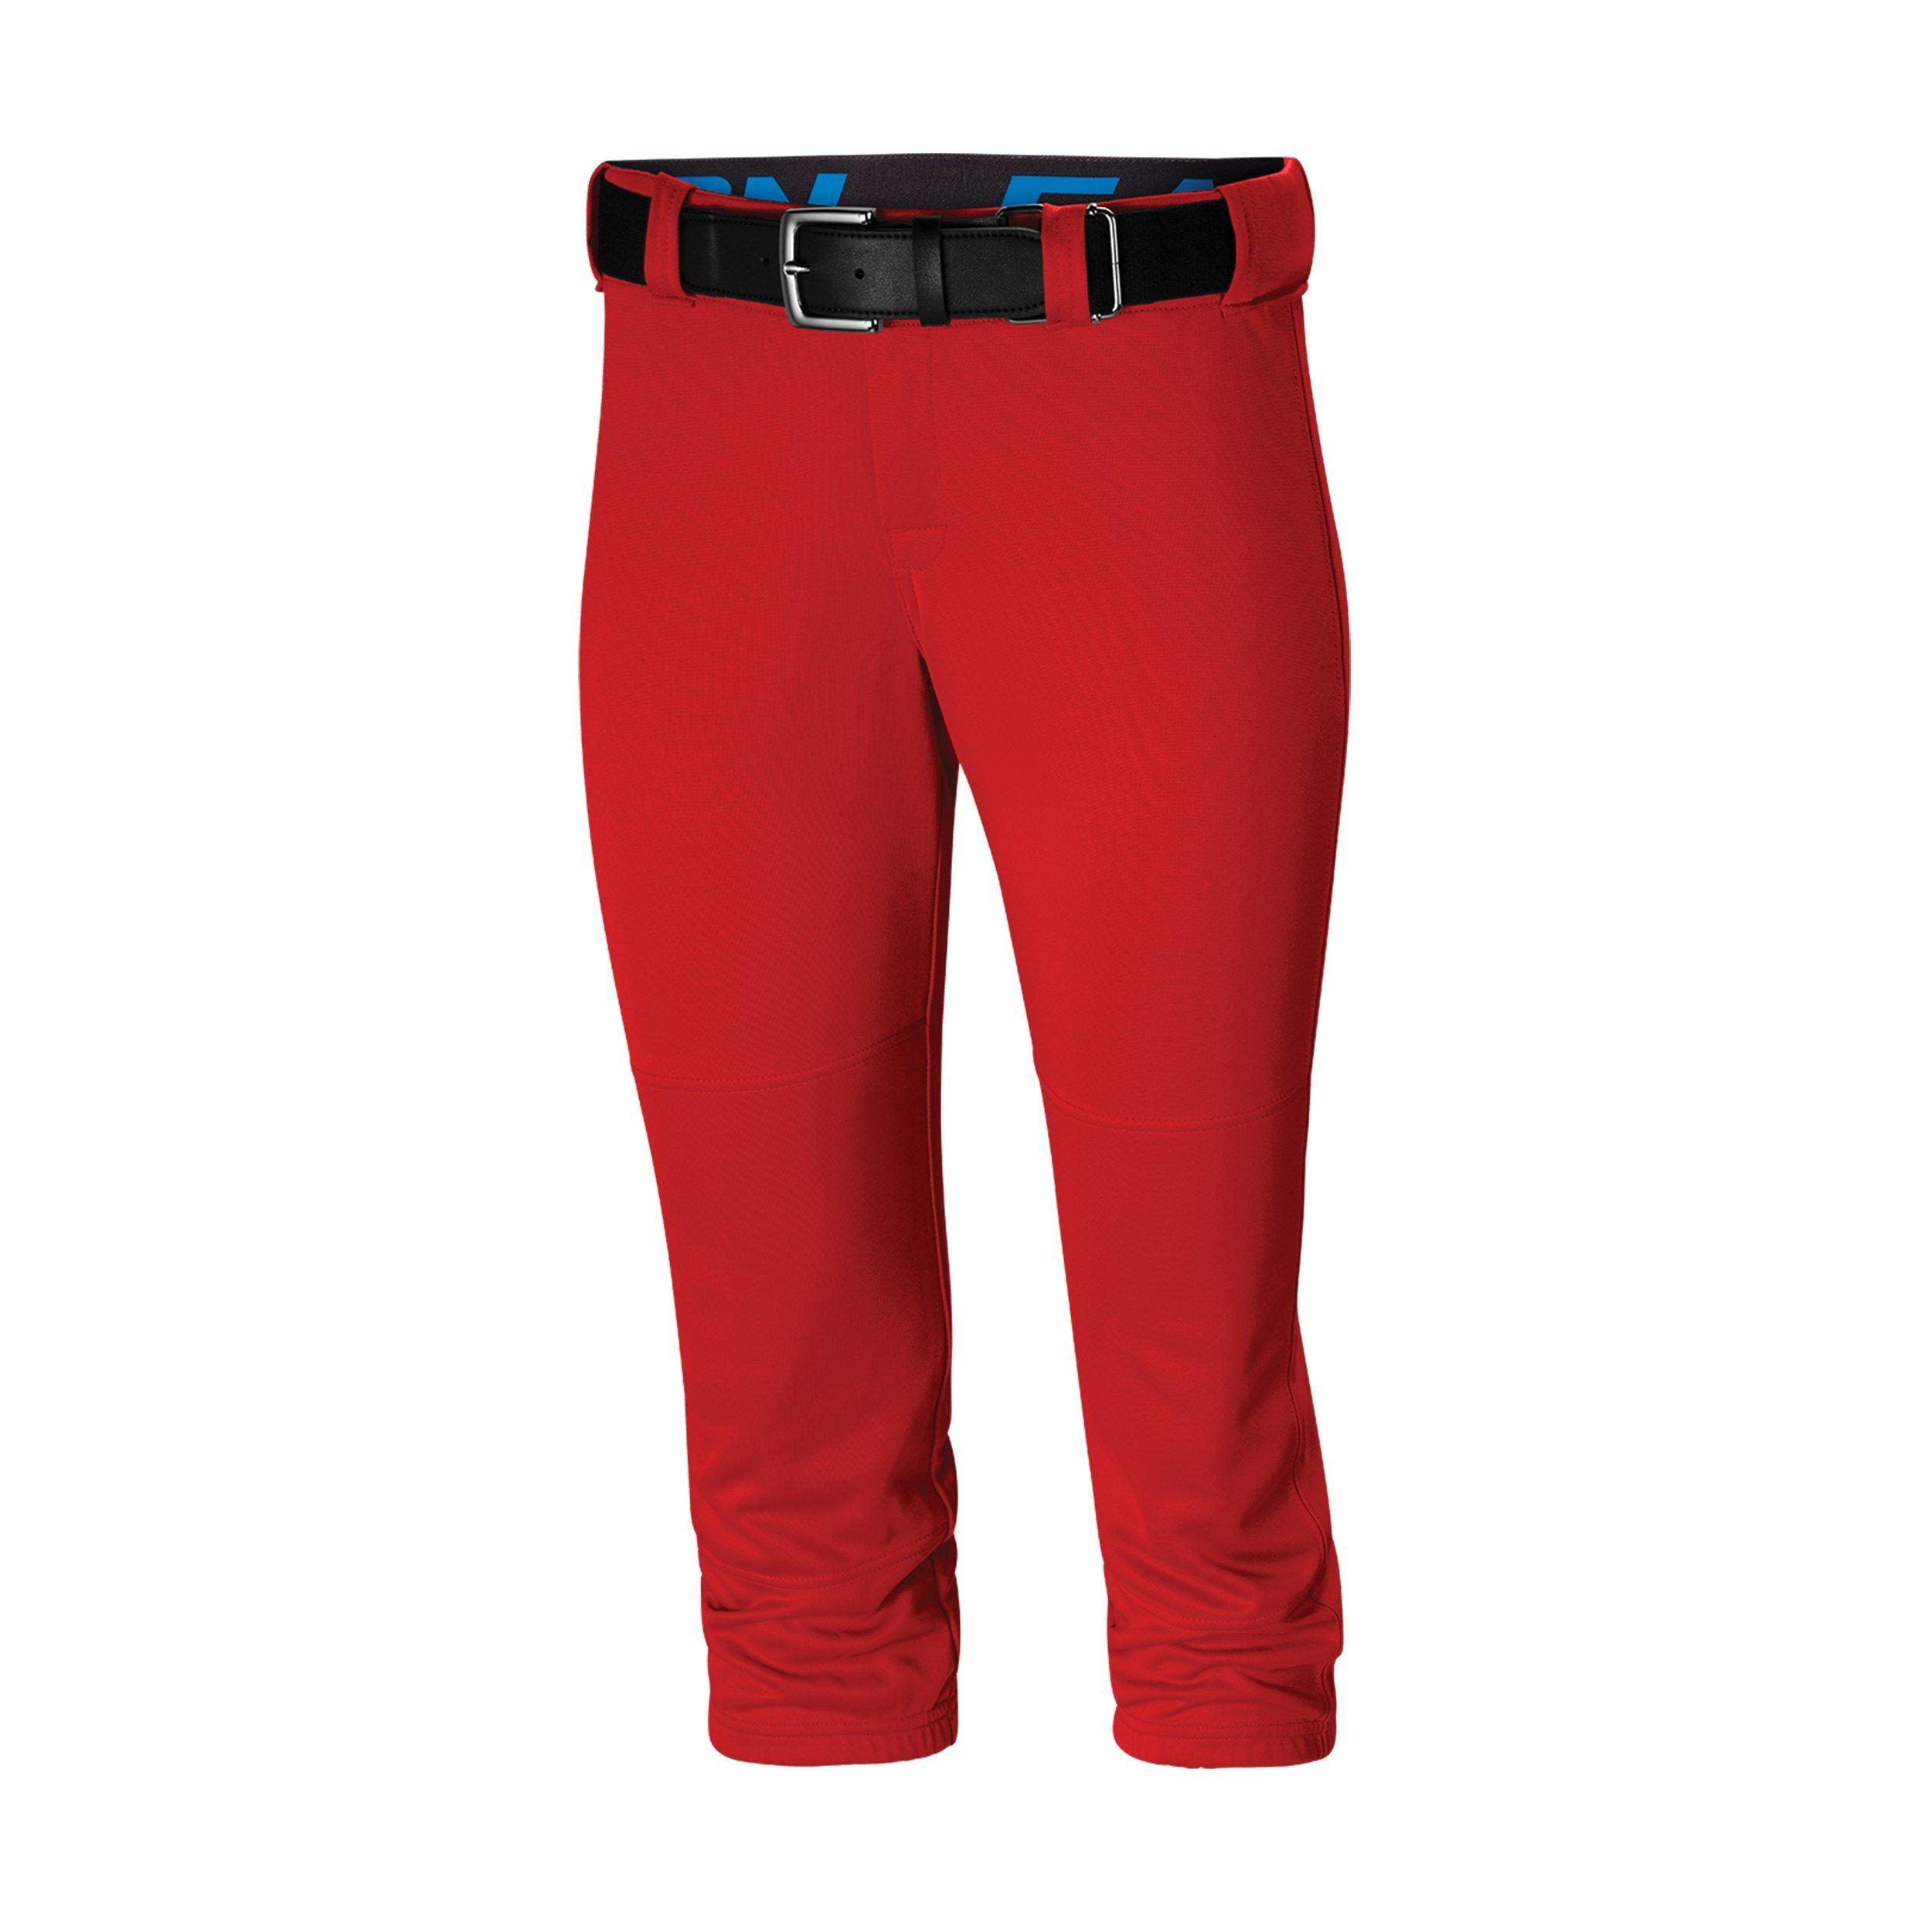 Under Armour Women's Utility Fastpitch Softball Pants Red Xl XL